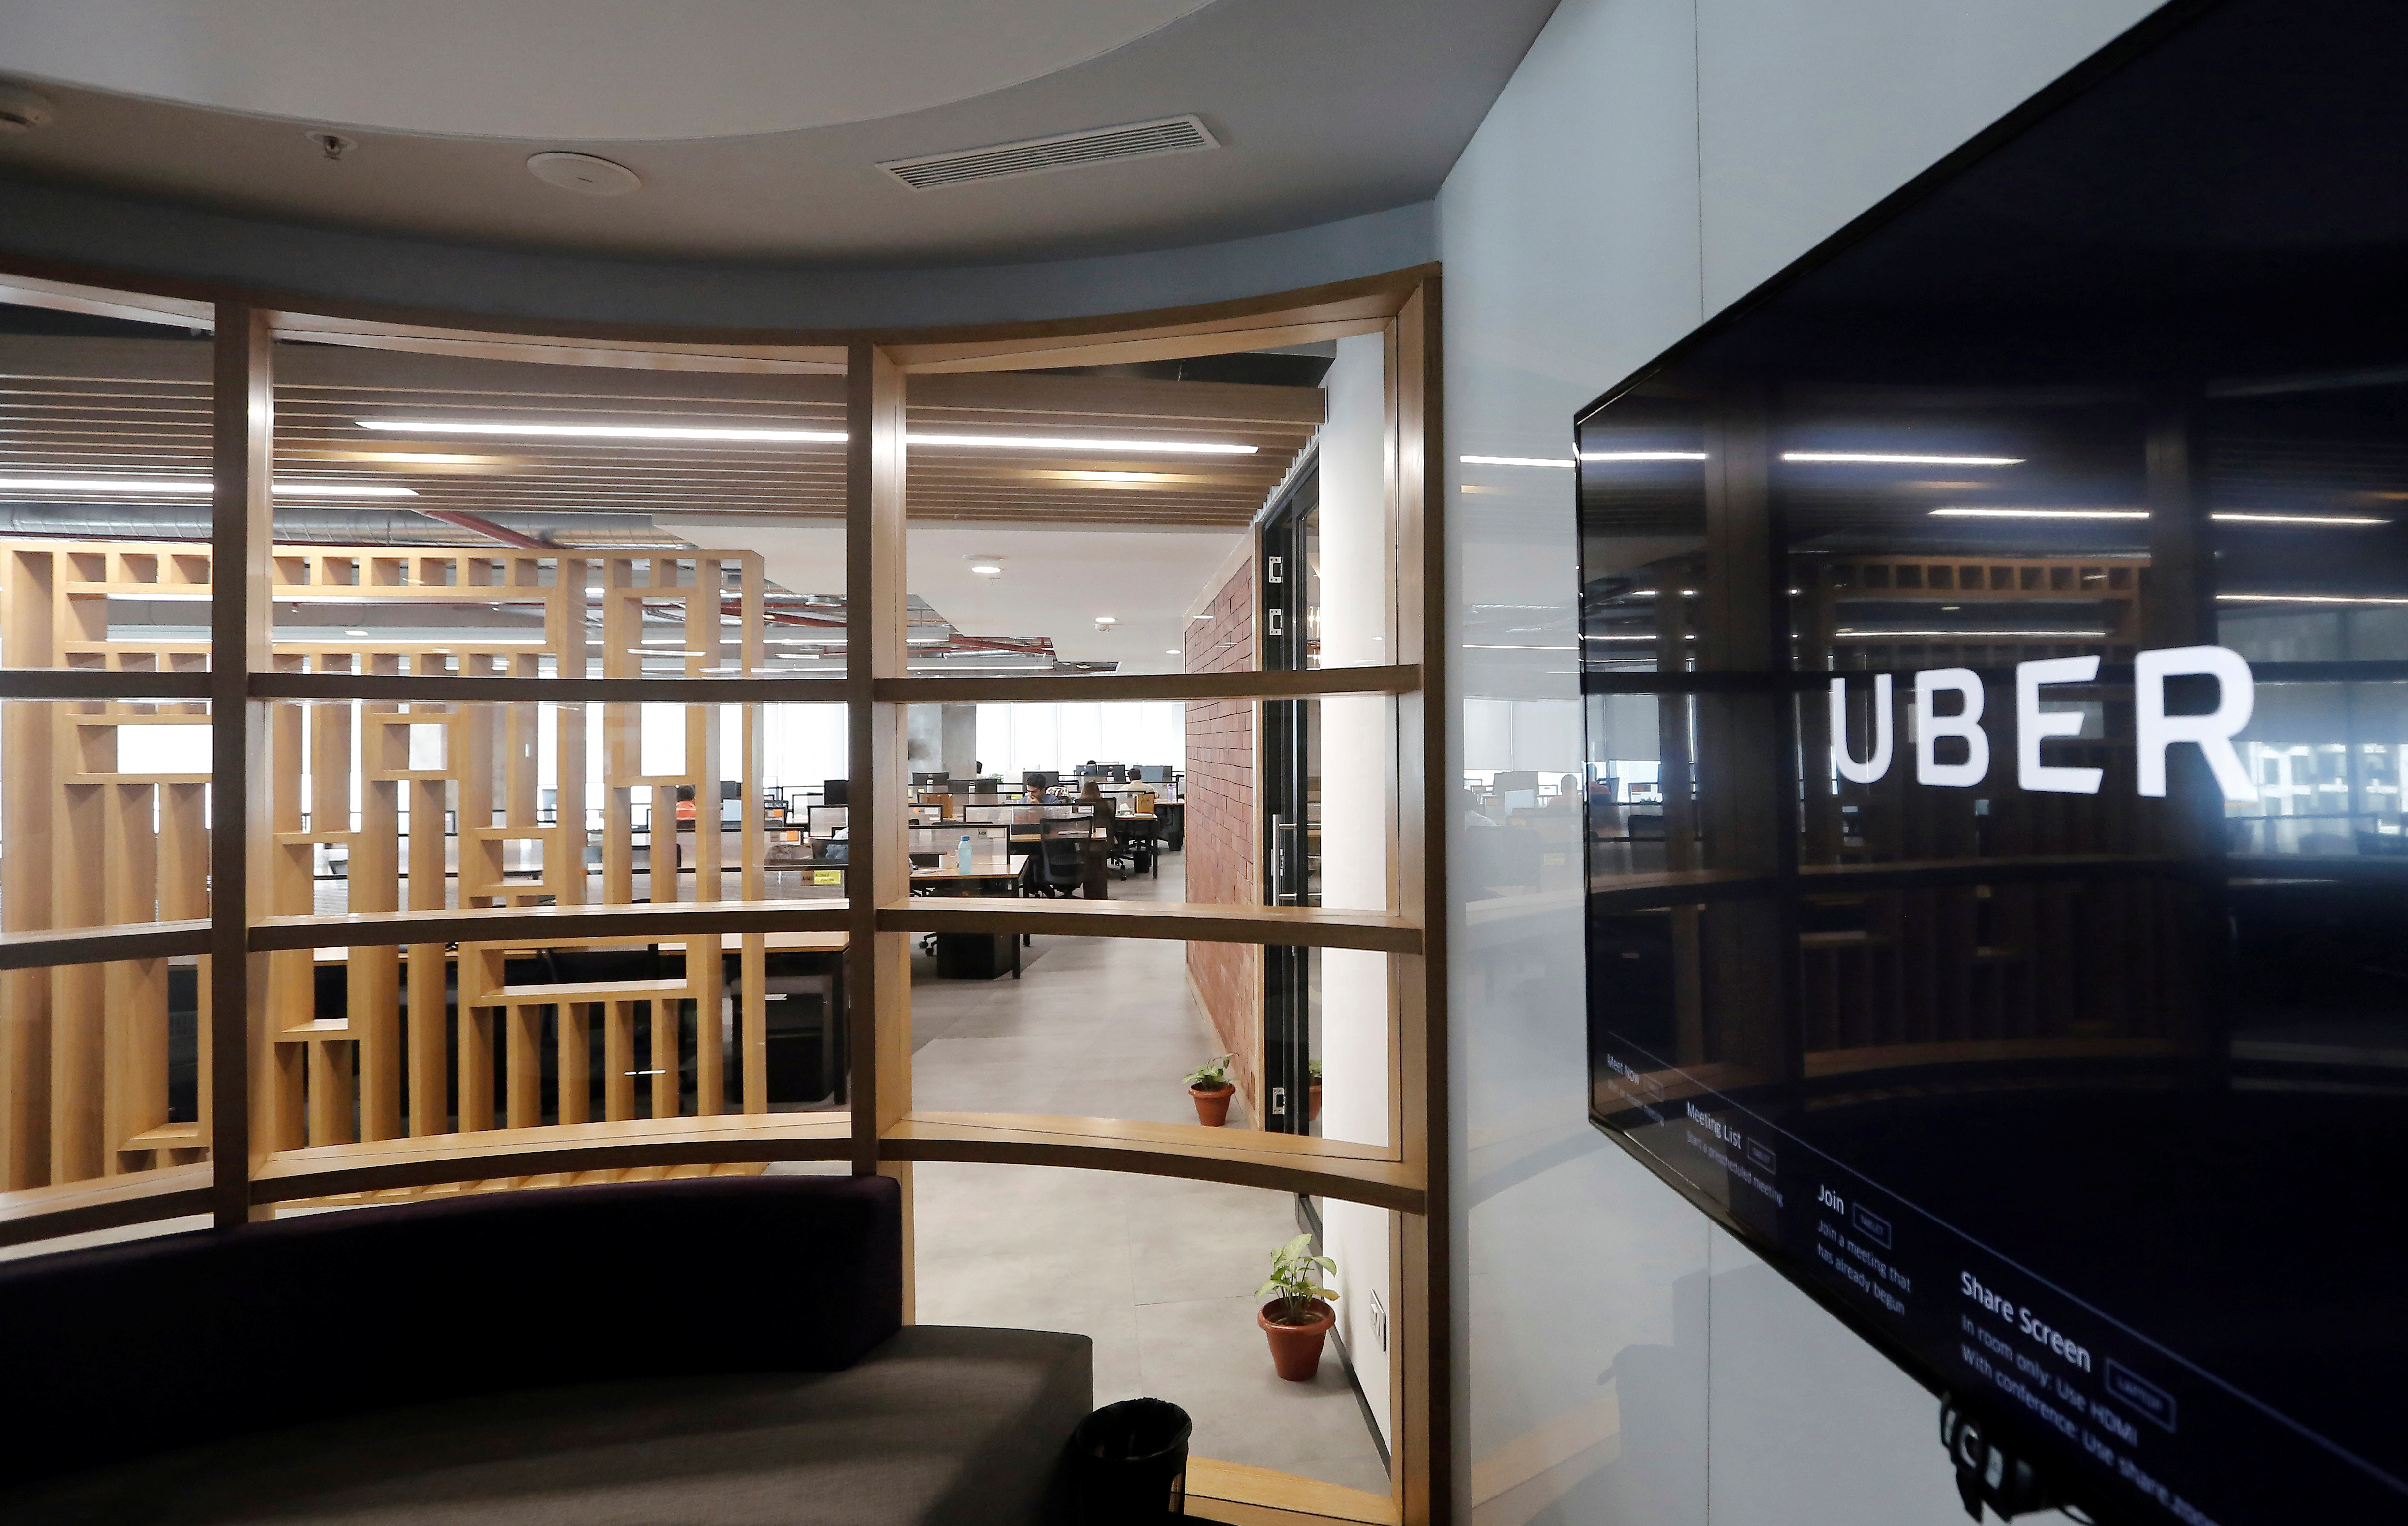 The interior of the office of ride-hailing service Uber is seen in this picture in Gurugram